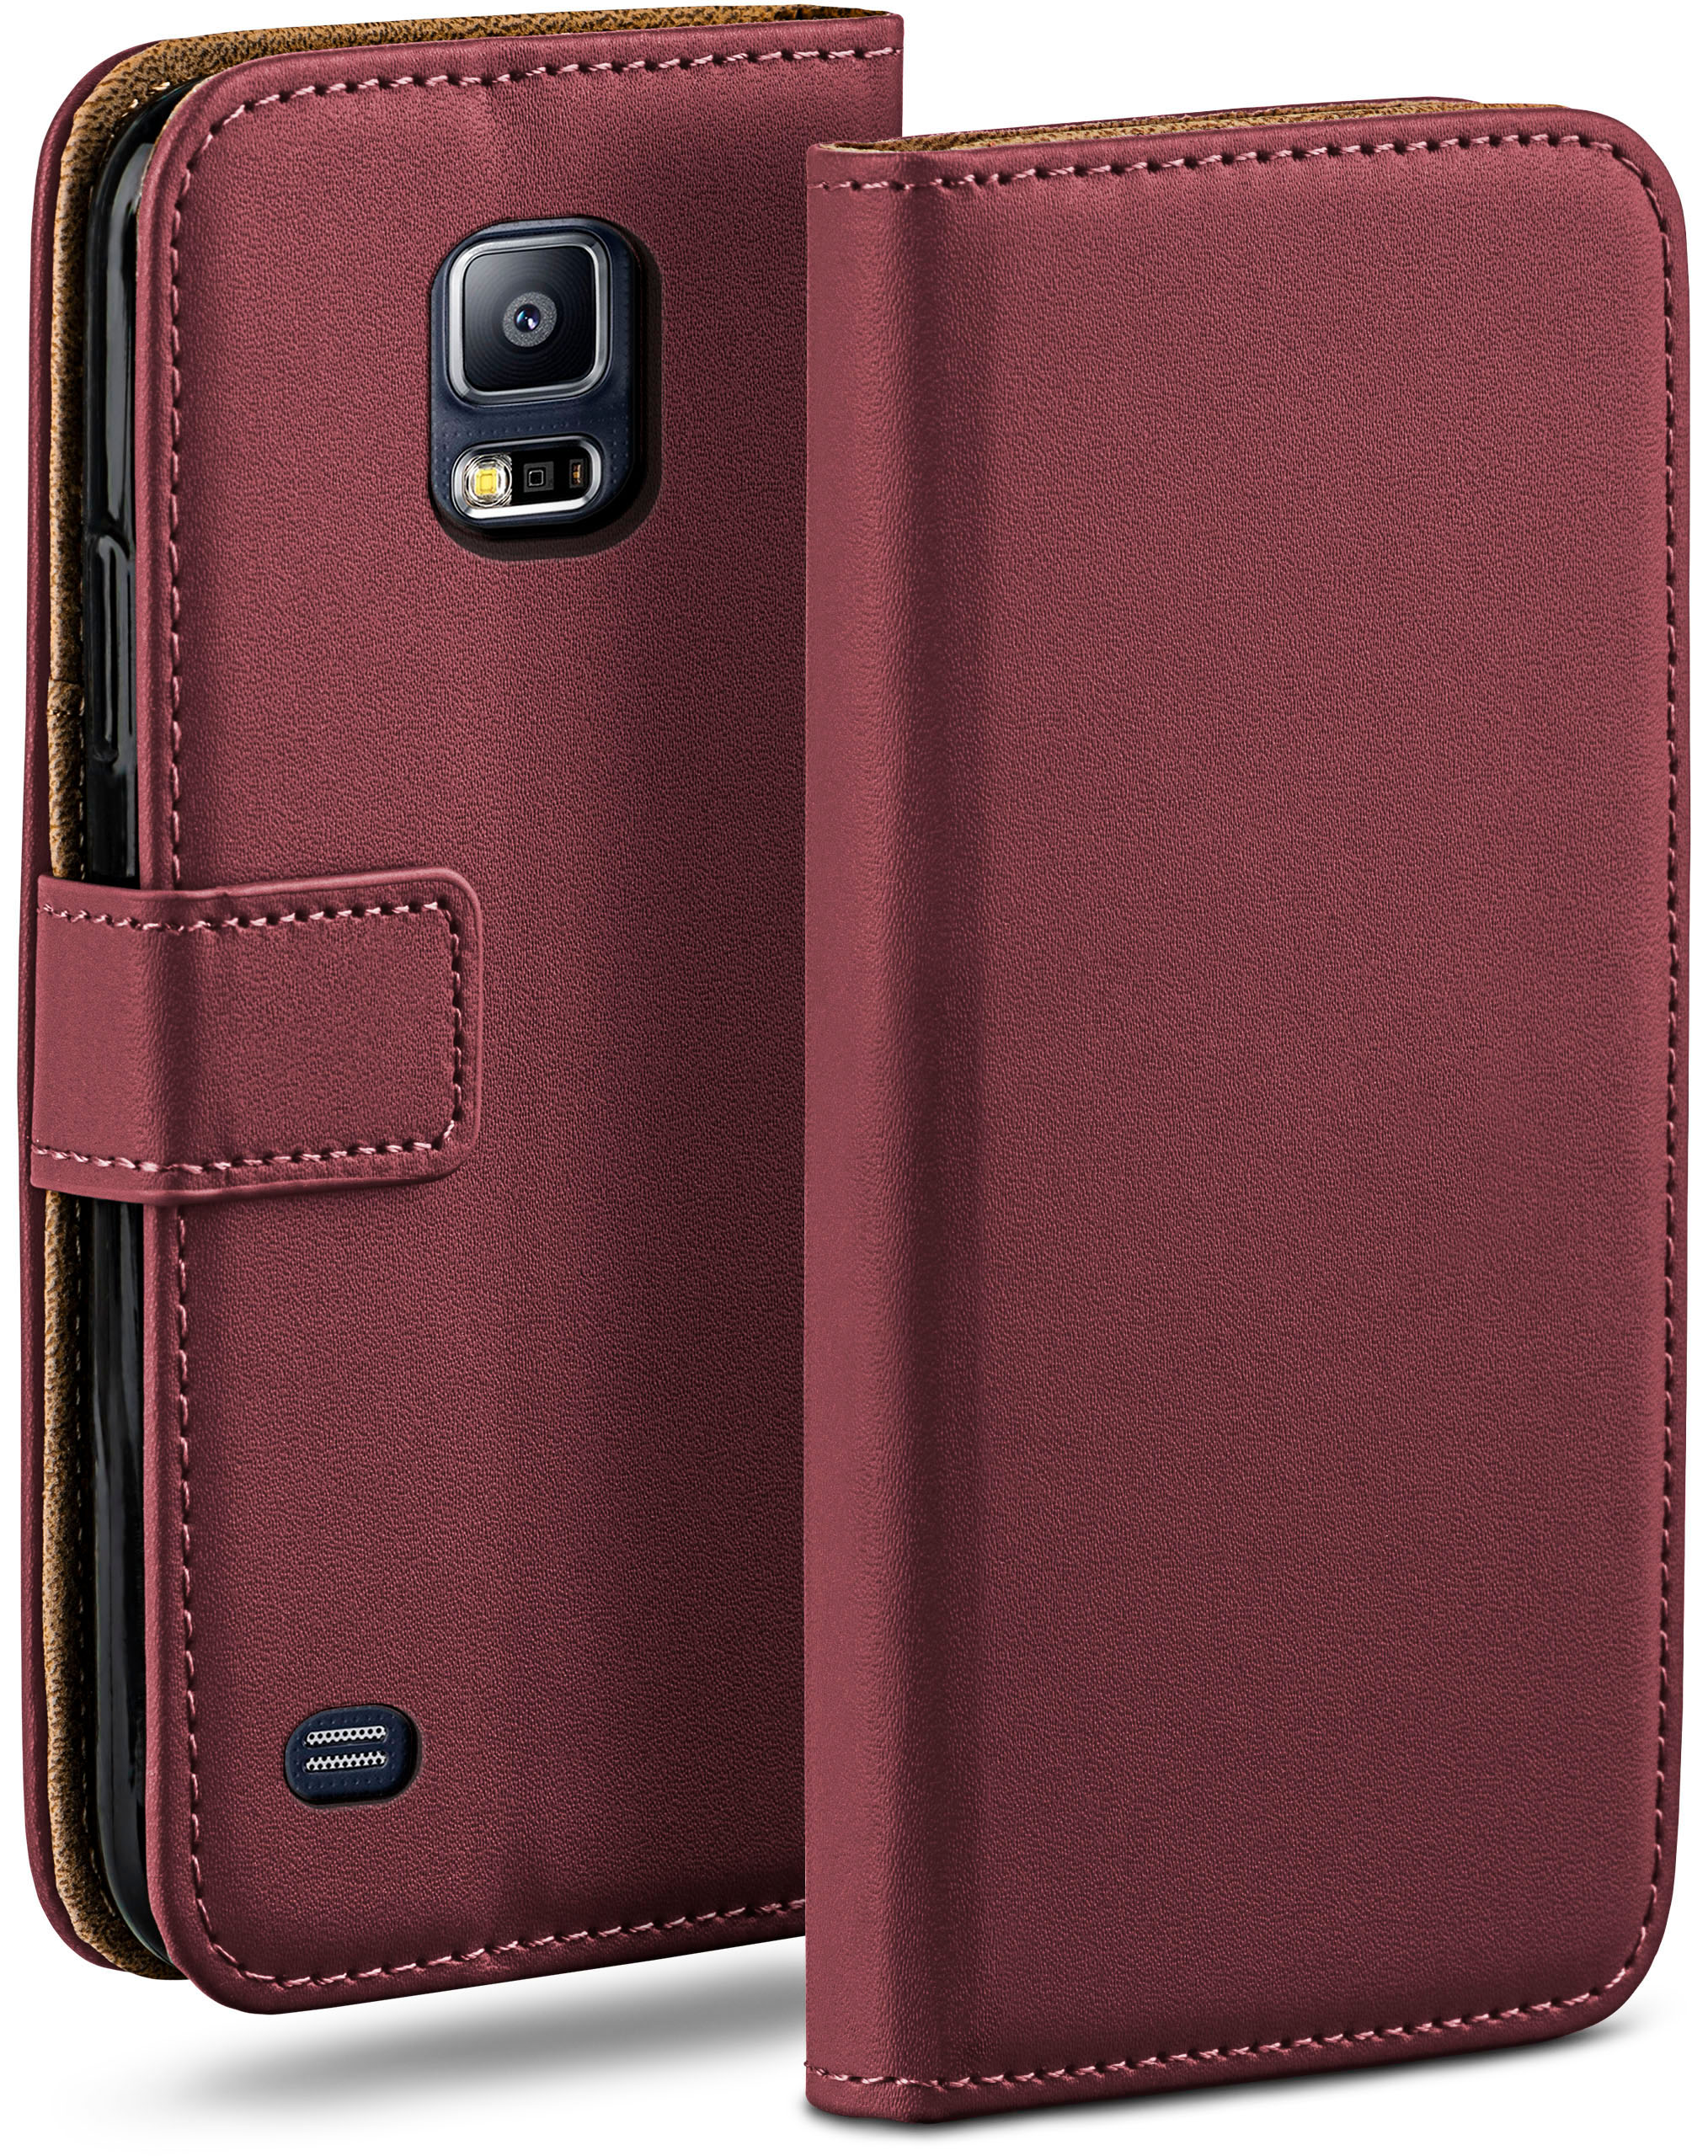 MOEX Book Samsung, Galaxy Maroon-Red Bookcover, S5 Case, Neo, / S5